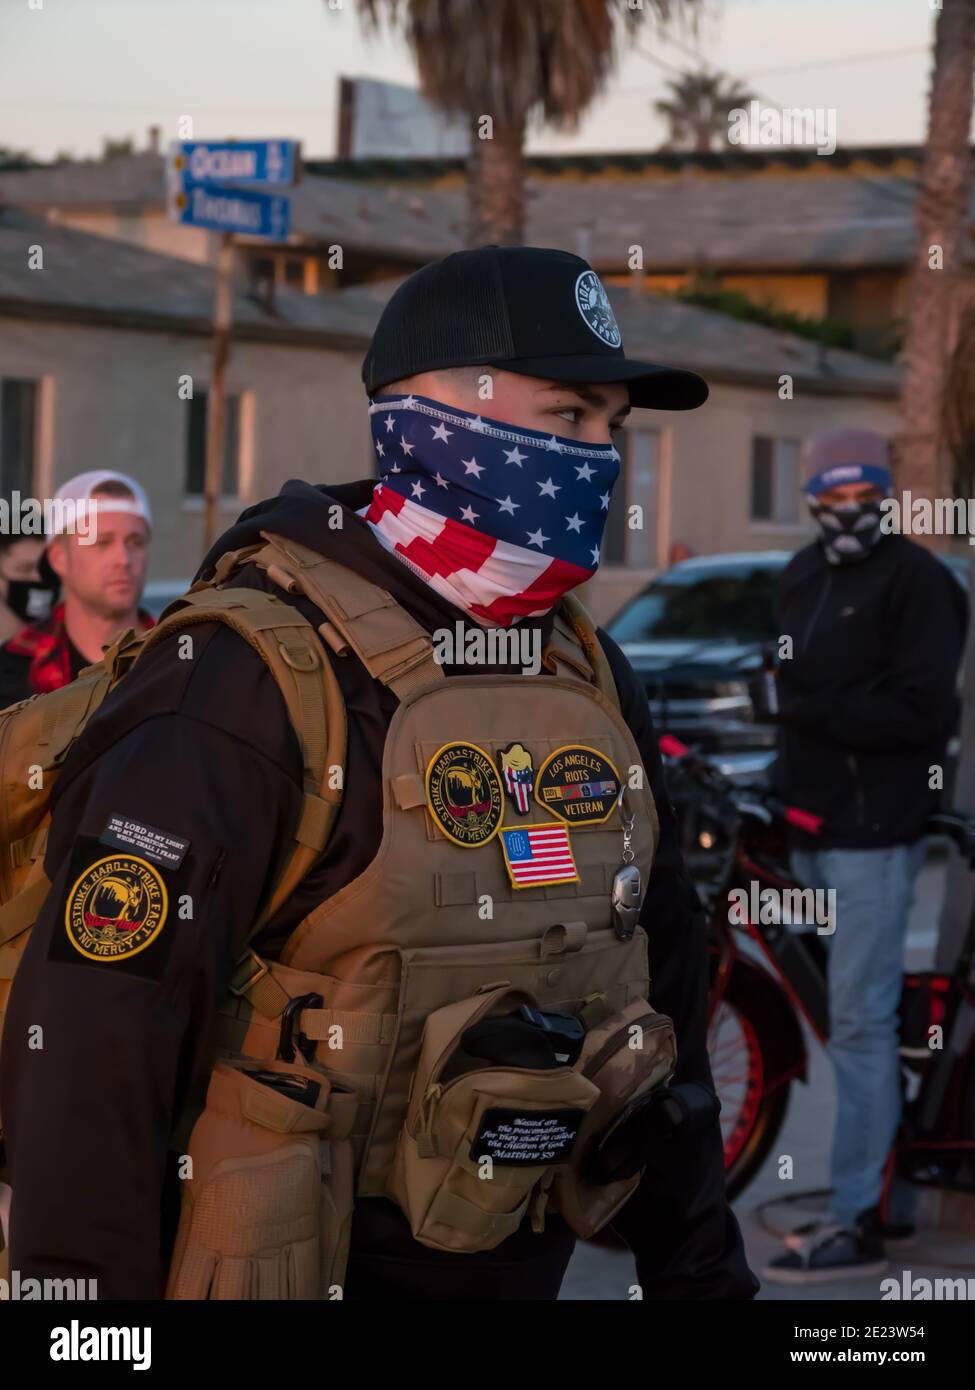 January 9, 2021 pro Trump rally riot Patriot March in Pacific Beach, San Diego, California Stock Photo